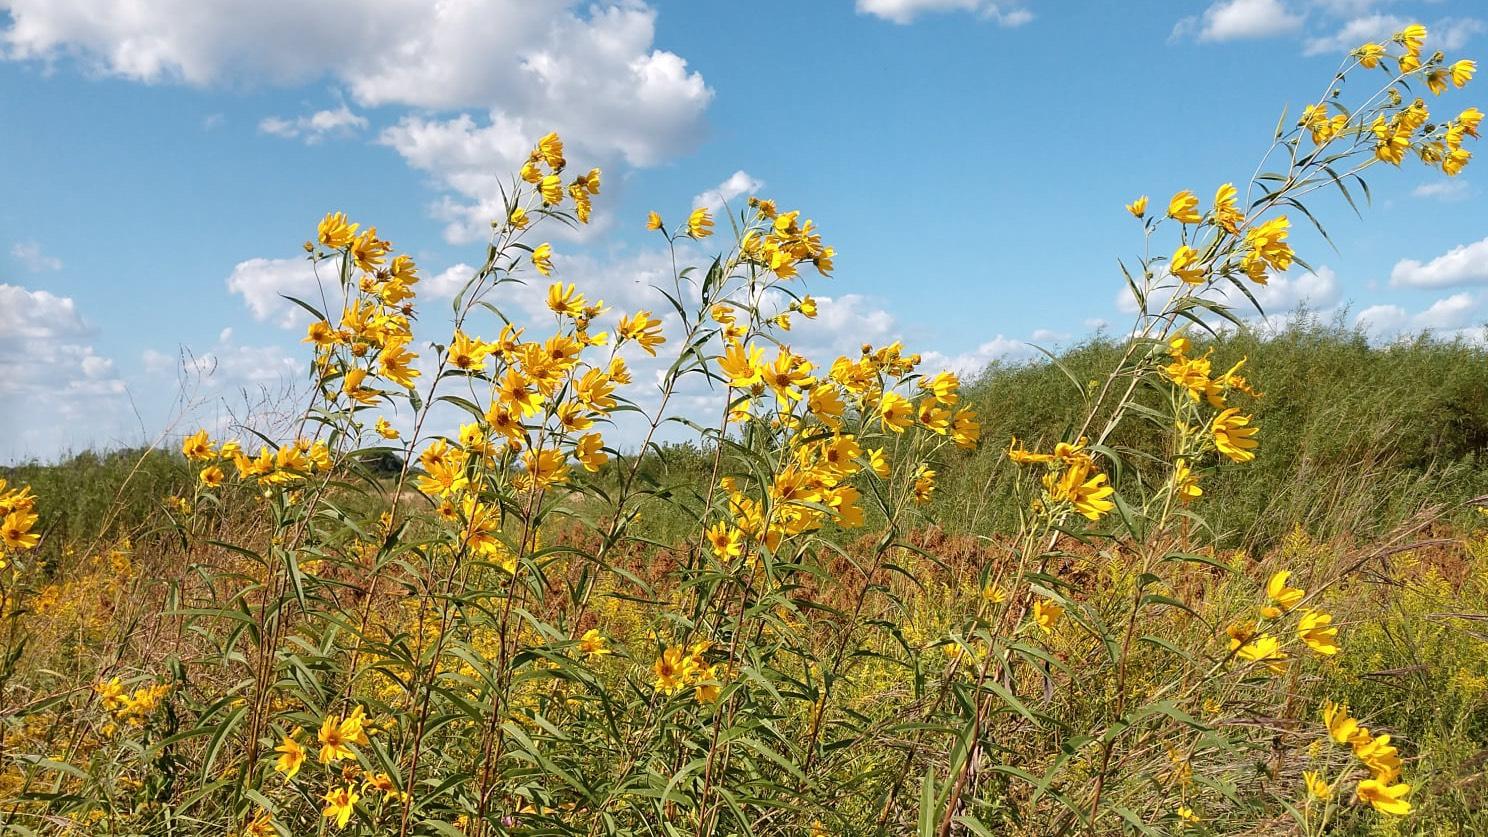 Prairies are characterized by grasses and wildflowers, as well as their unique soil composition. (Midewin National Tallgrass Prairie / U.S. Forest Service)